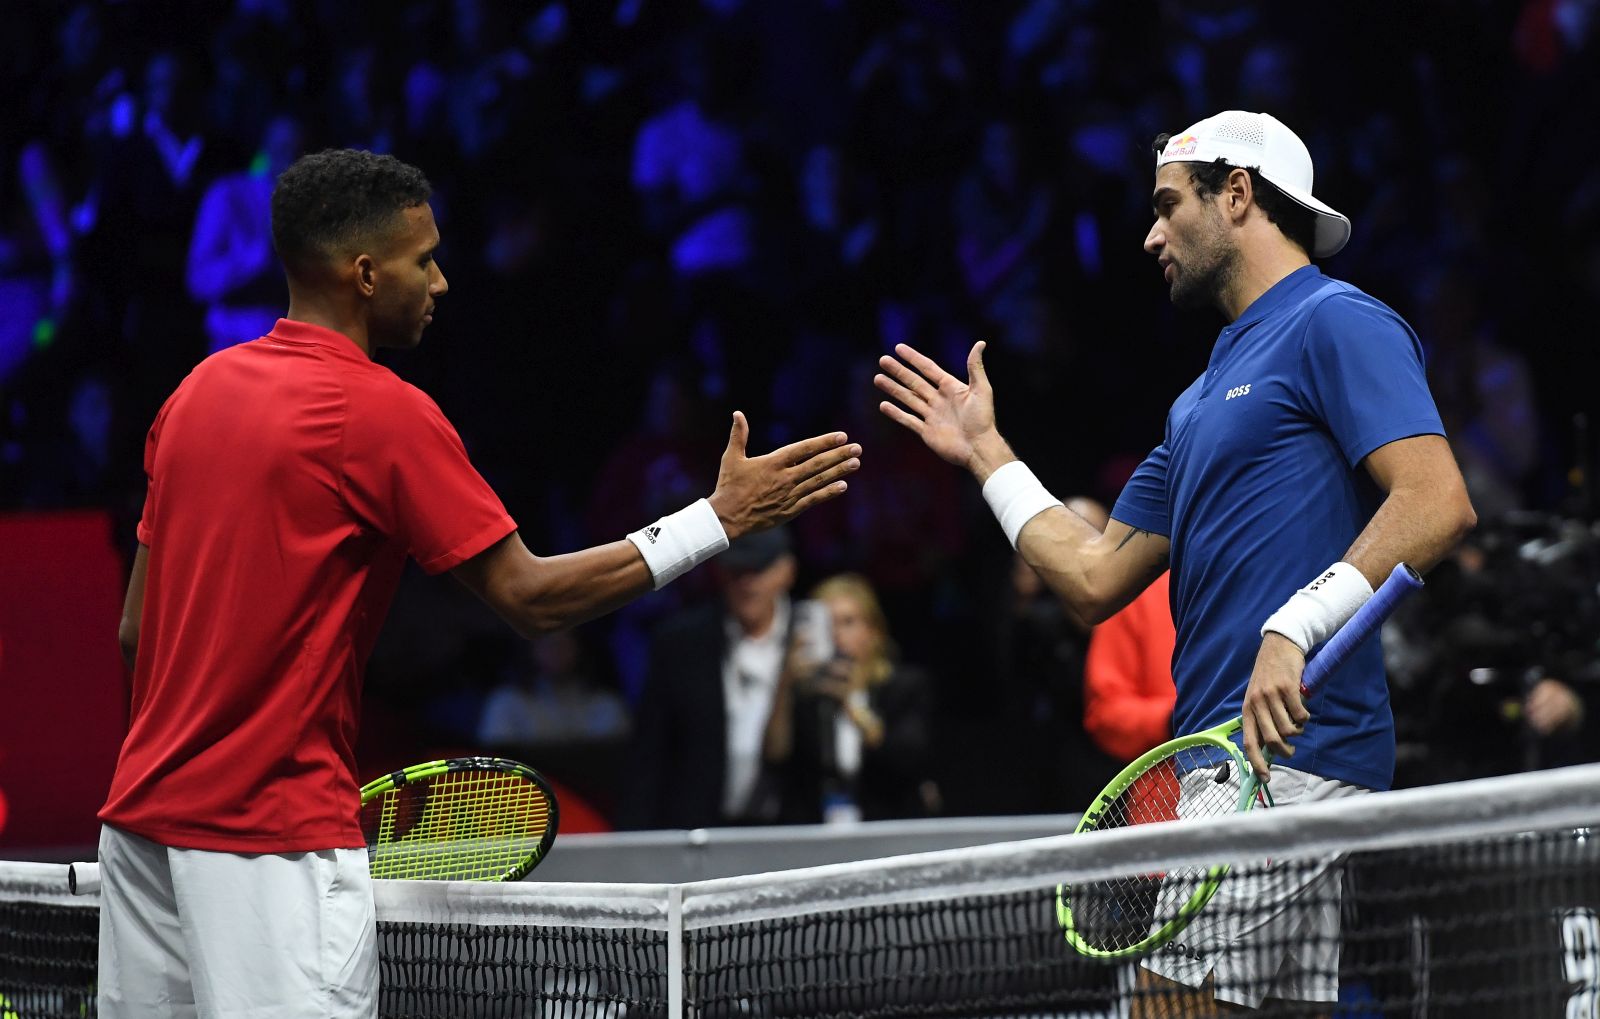 epa10203699 Matteo Berrettini of Team Europe (R) following his win over Felix Auger-Aliassime (L) of Team World during a Laver Cup tennis match at the O2 Arena in London, Britain, 24 September 2022.  EPA/ANDY RAIN